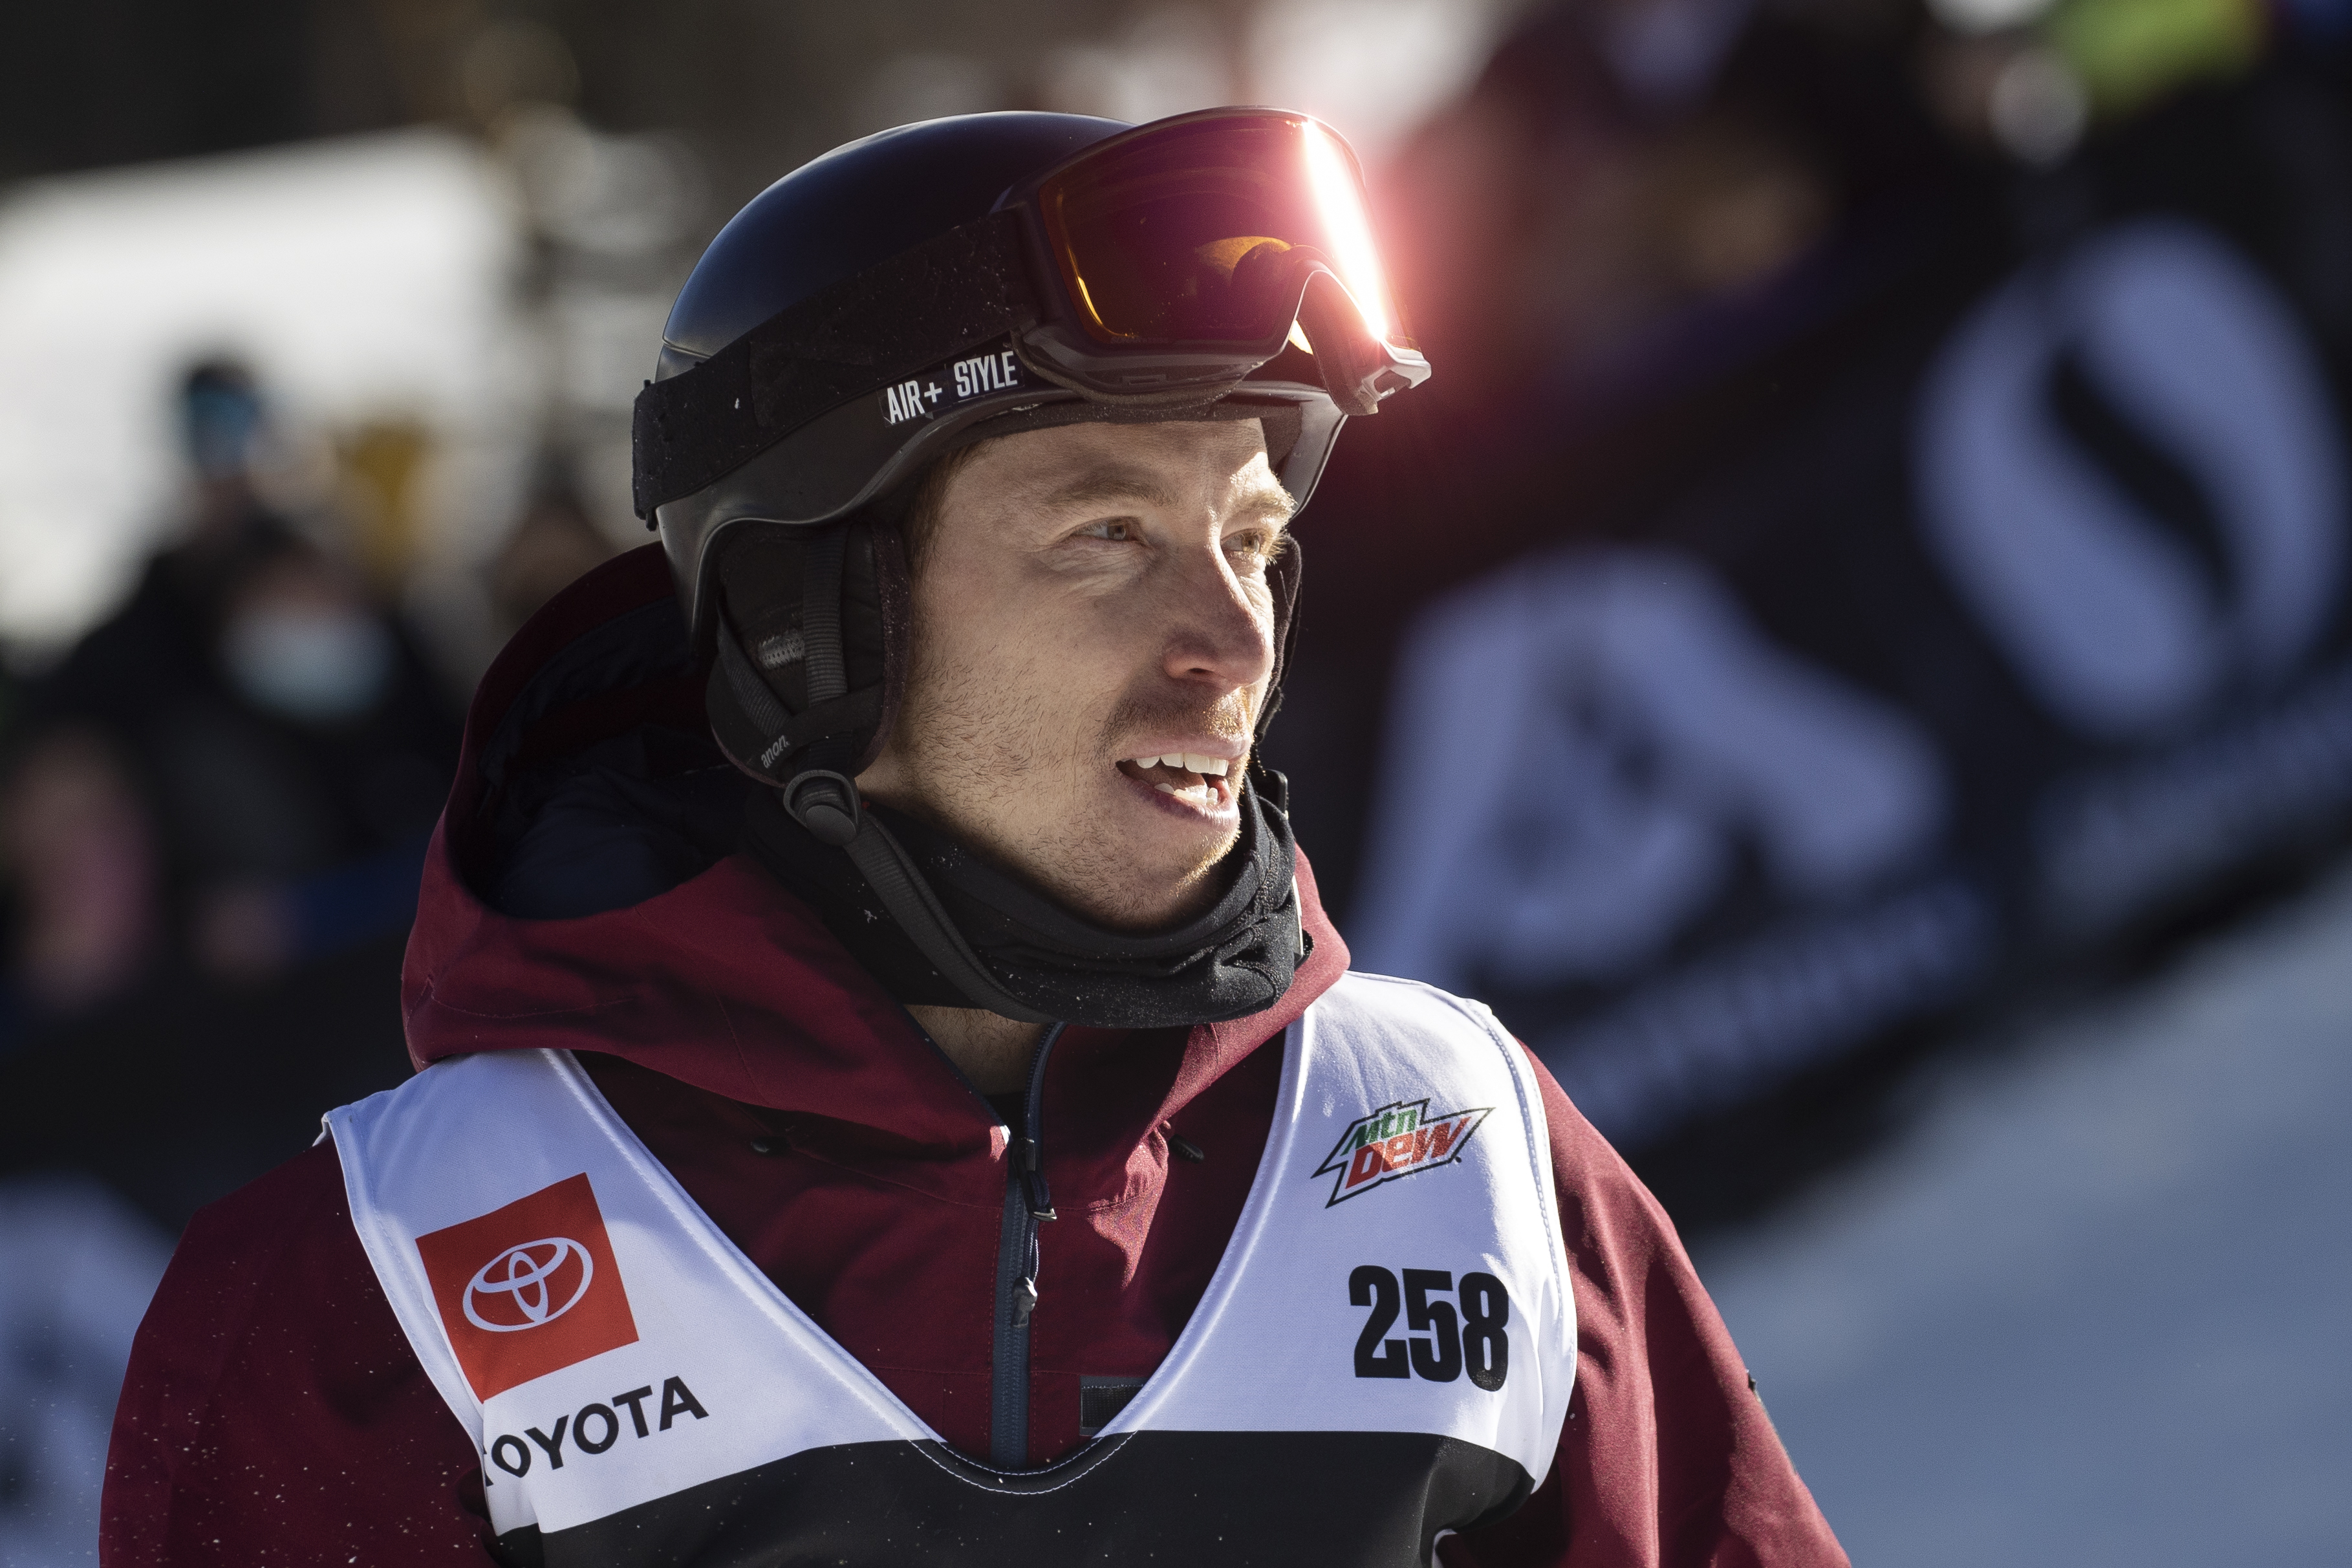 Canzano: Shaun White stays above it all, whether at Olympics or